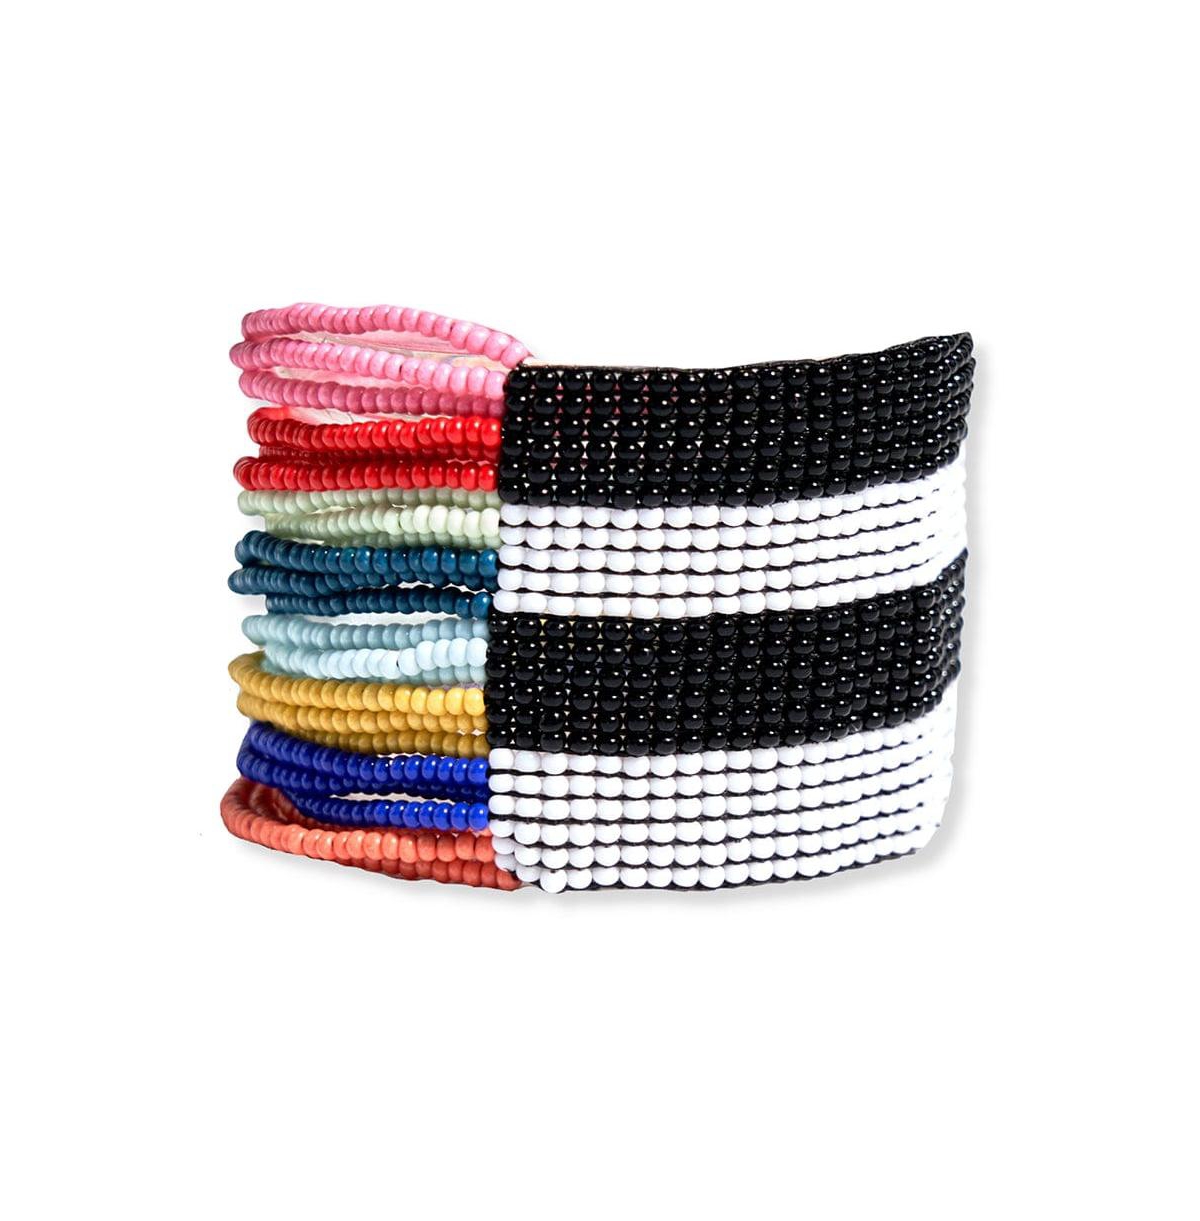 Olive Multi Layer Beaded Stretch Bracelet - Black and White Checkered